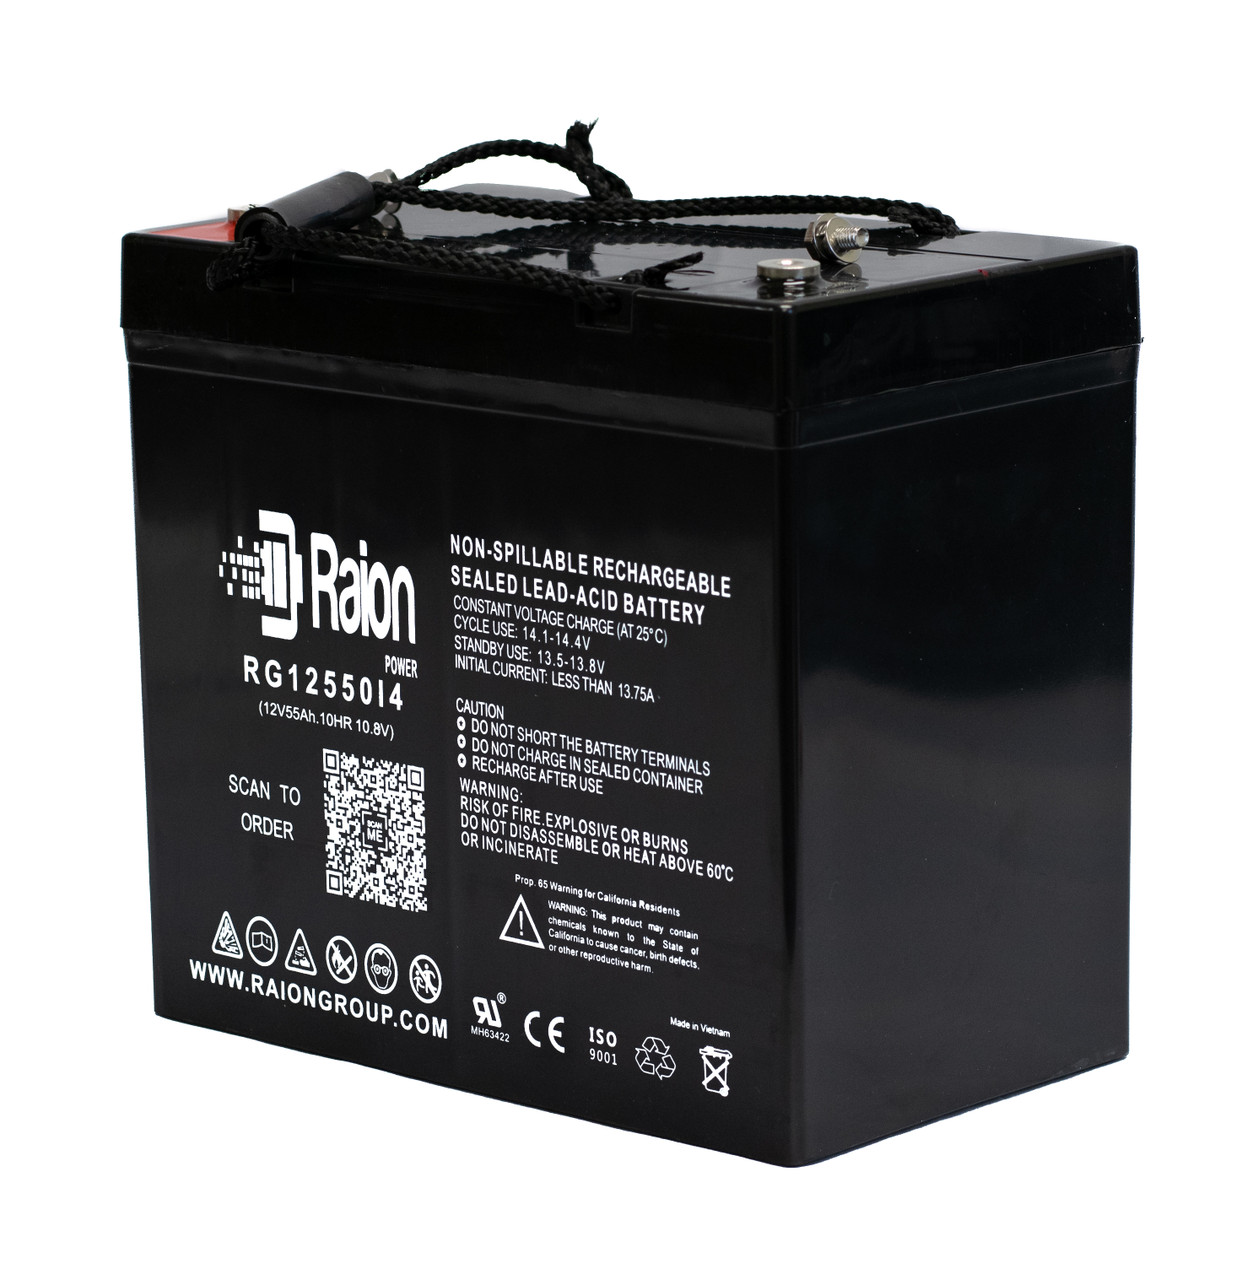 Raion Power 12V 55Ah 22NF Mobility Scooter Battery Replacement for Invacare Torque